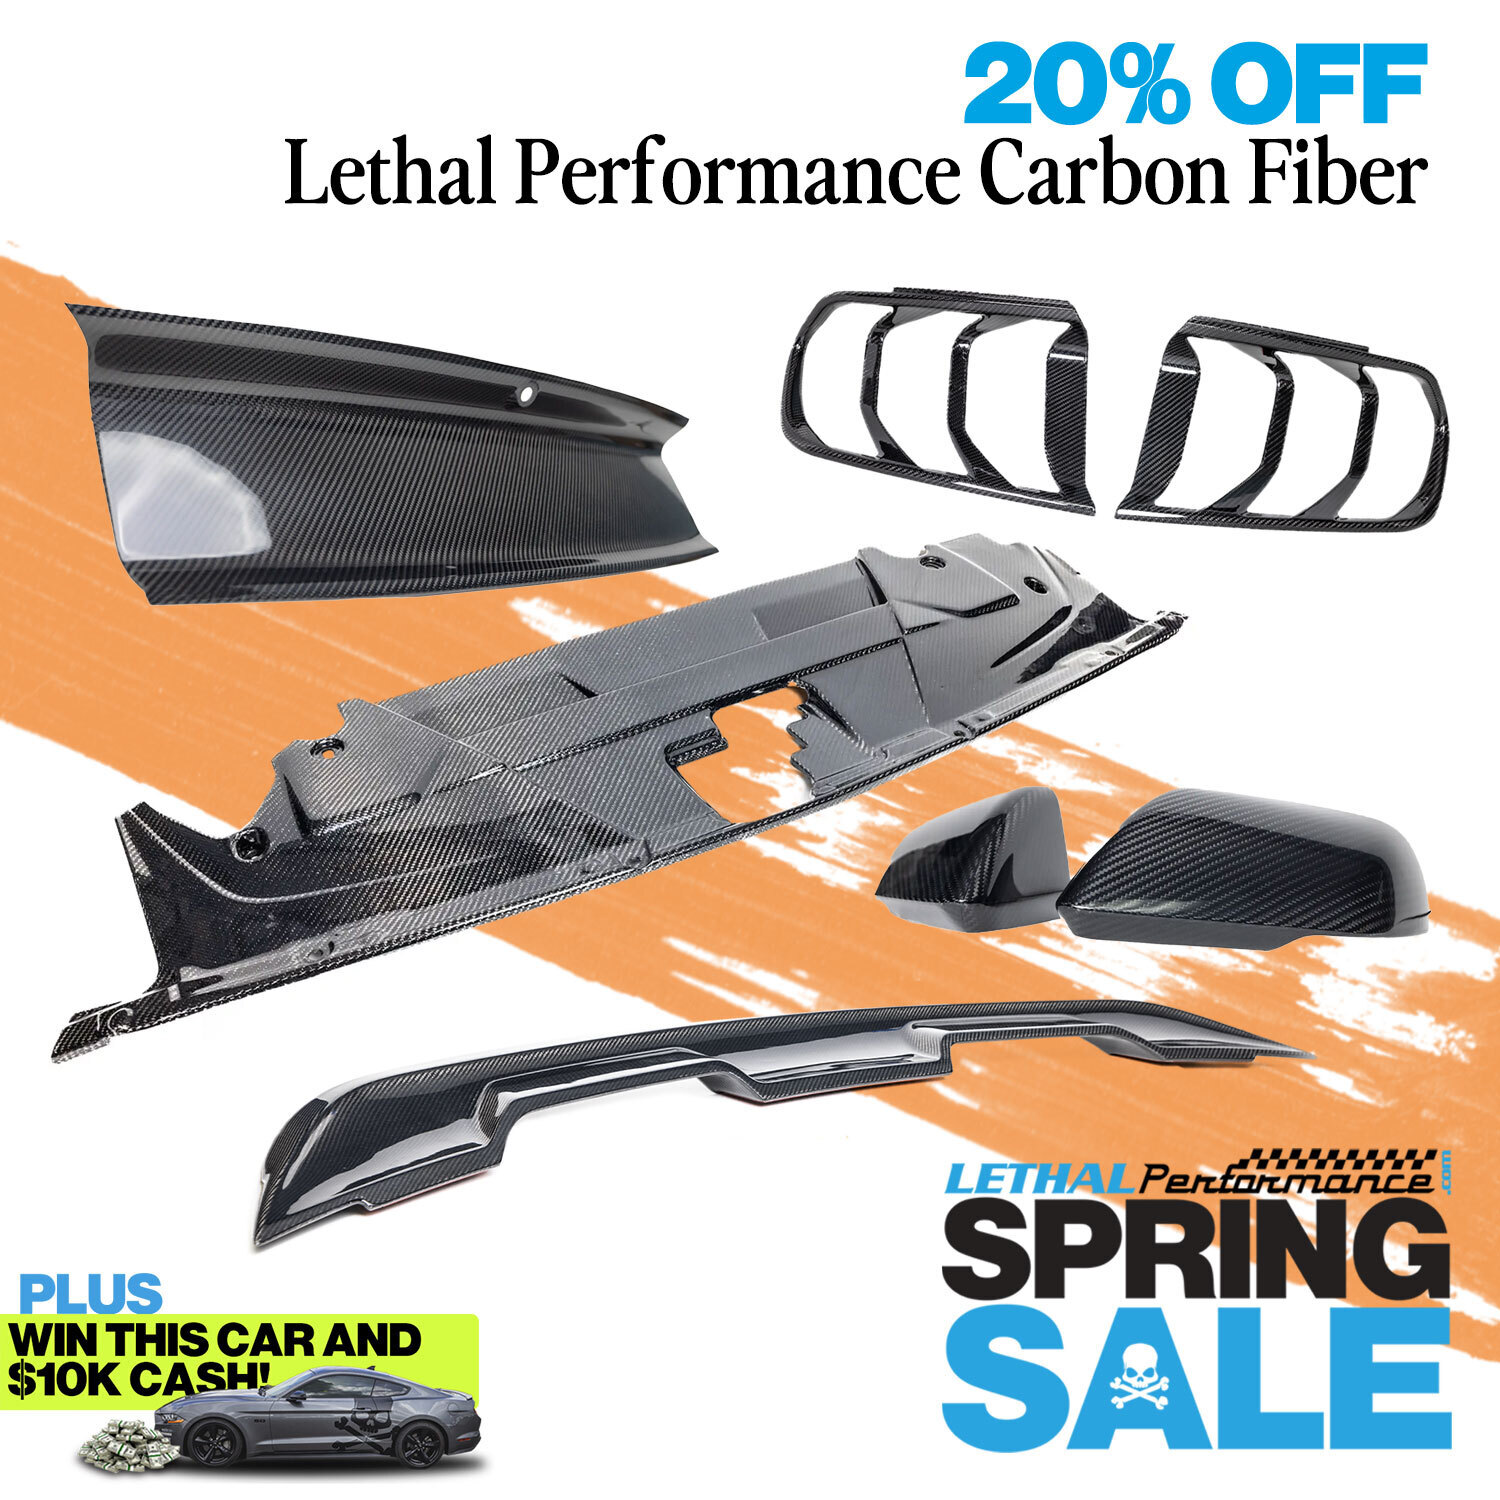 S650 Mustang Spring SALE has SPRUNG here at Lethal Performance!! springsale_carbon